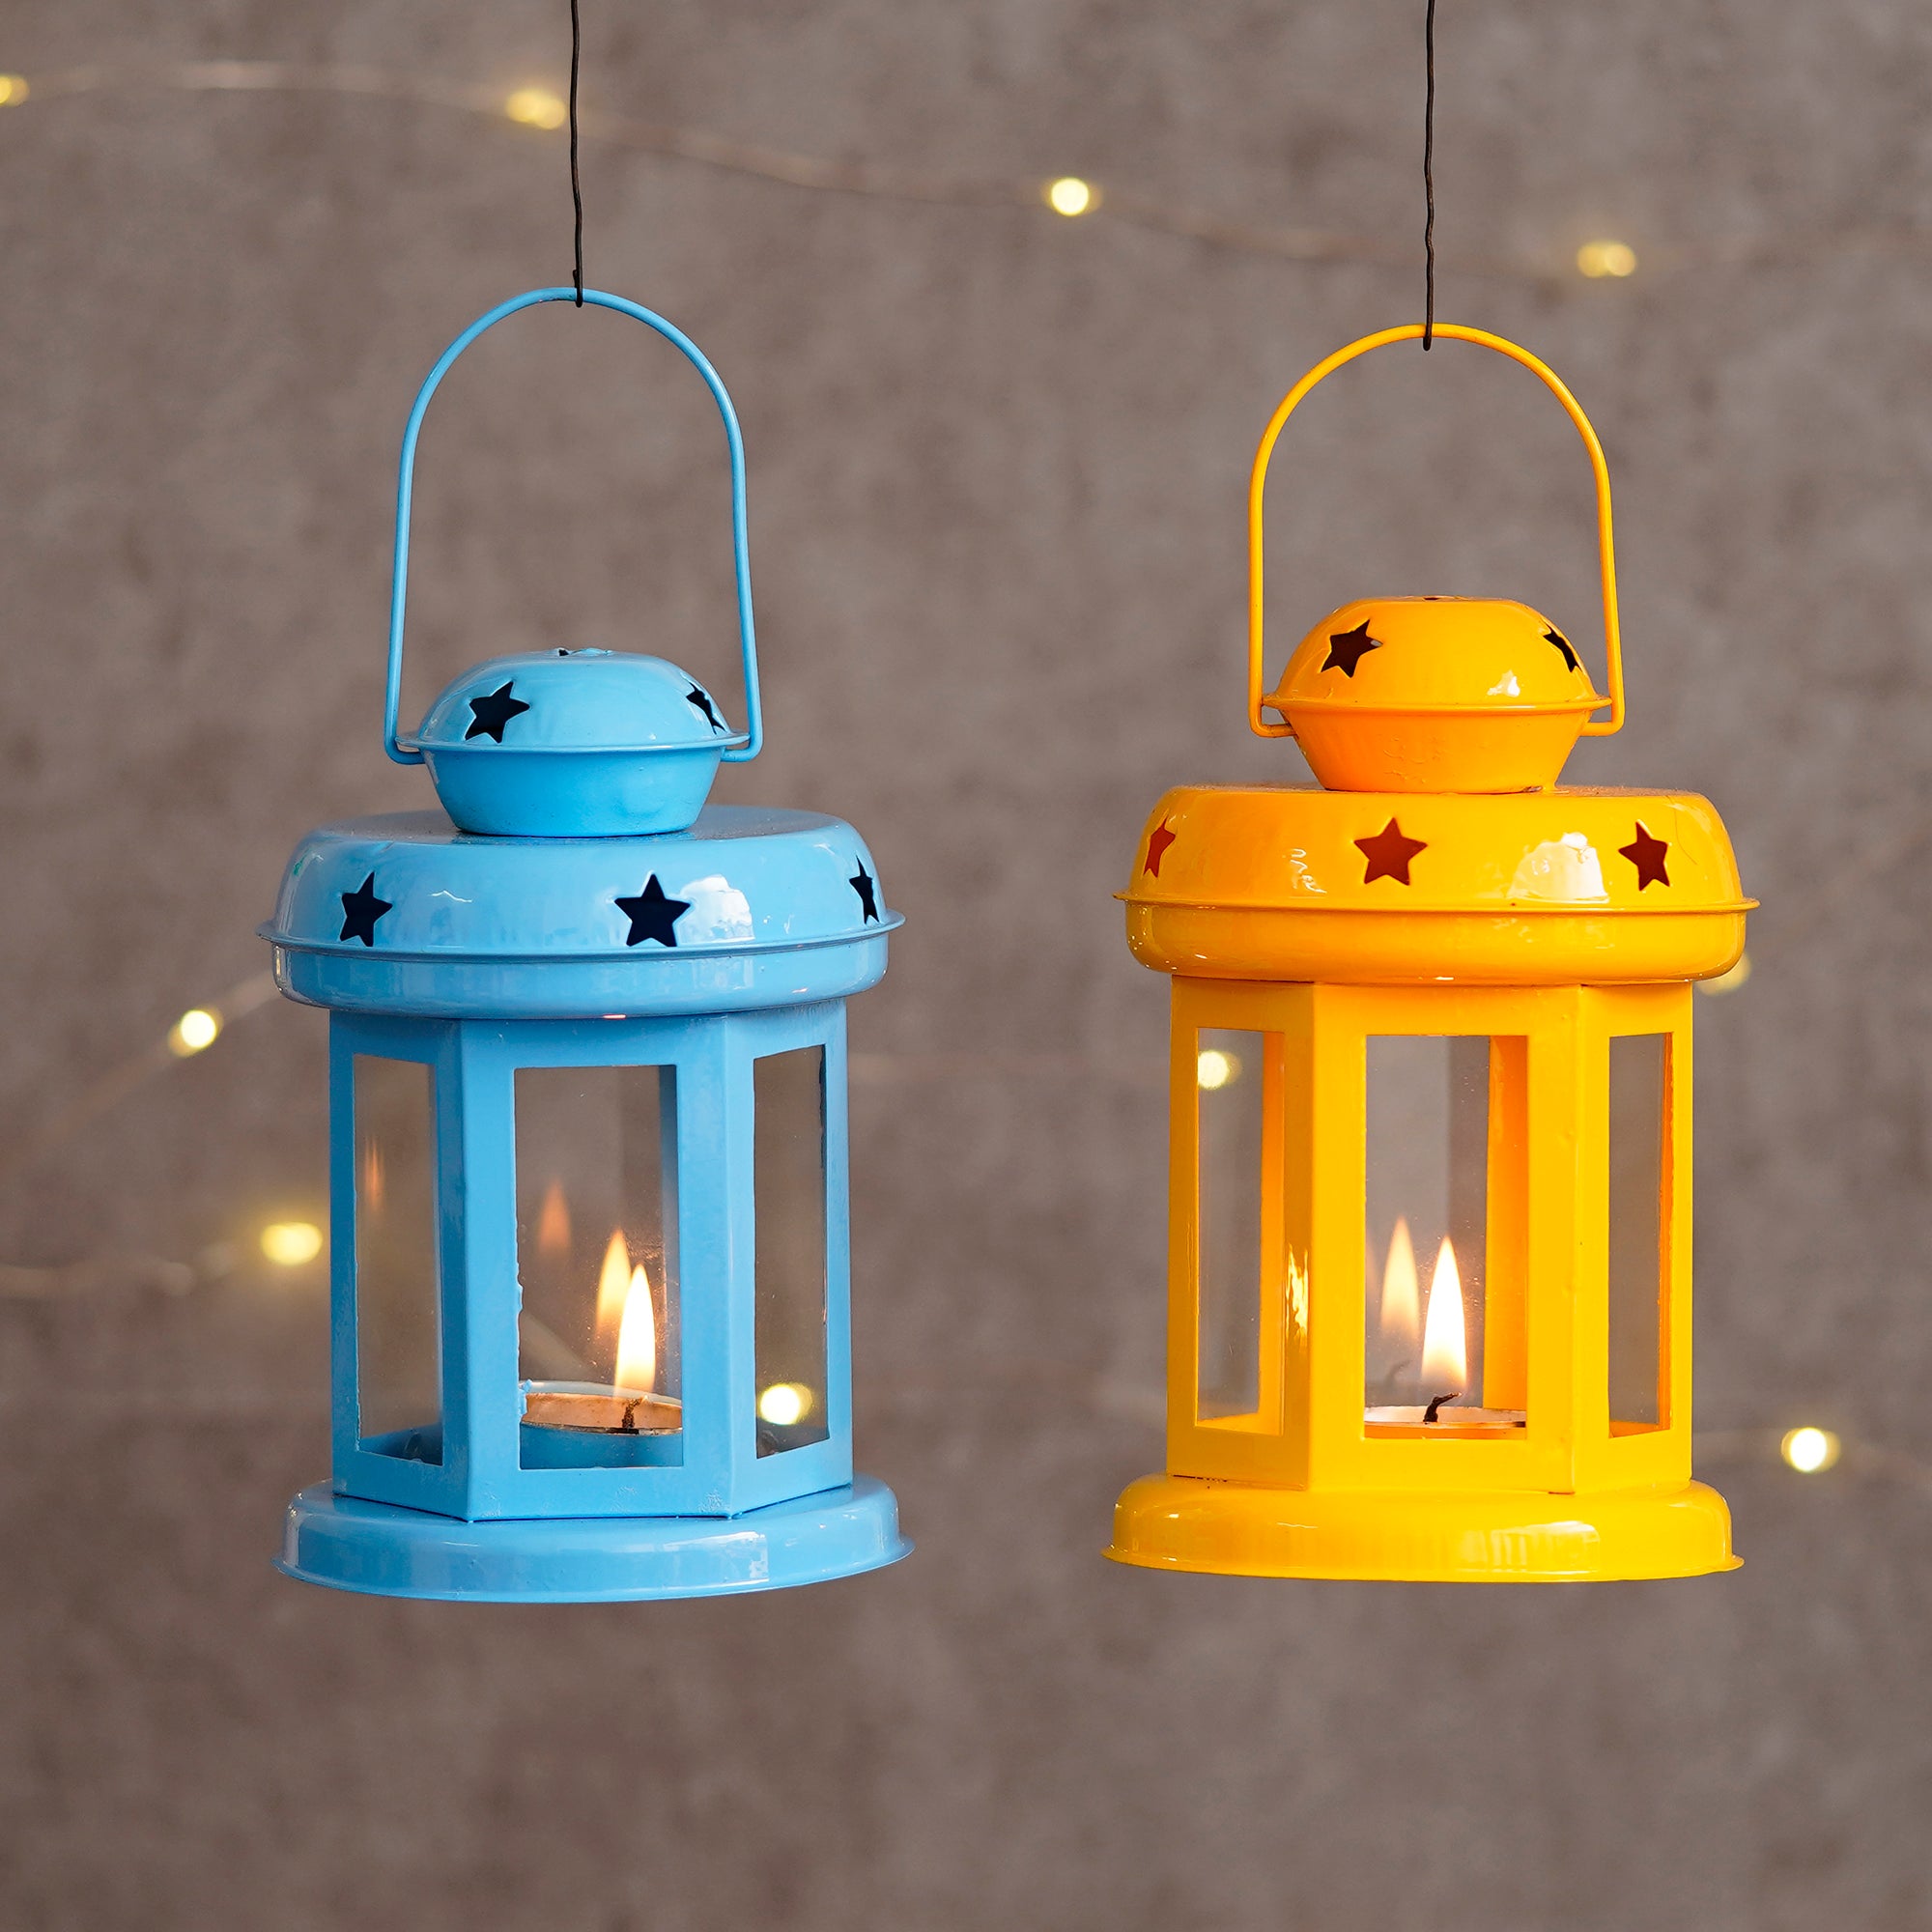 Set of 2 Blue and Yellow Metal hanging Tea Light Candle Holder Lantern with Tealight Candle 1